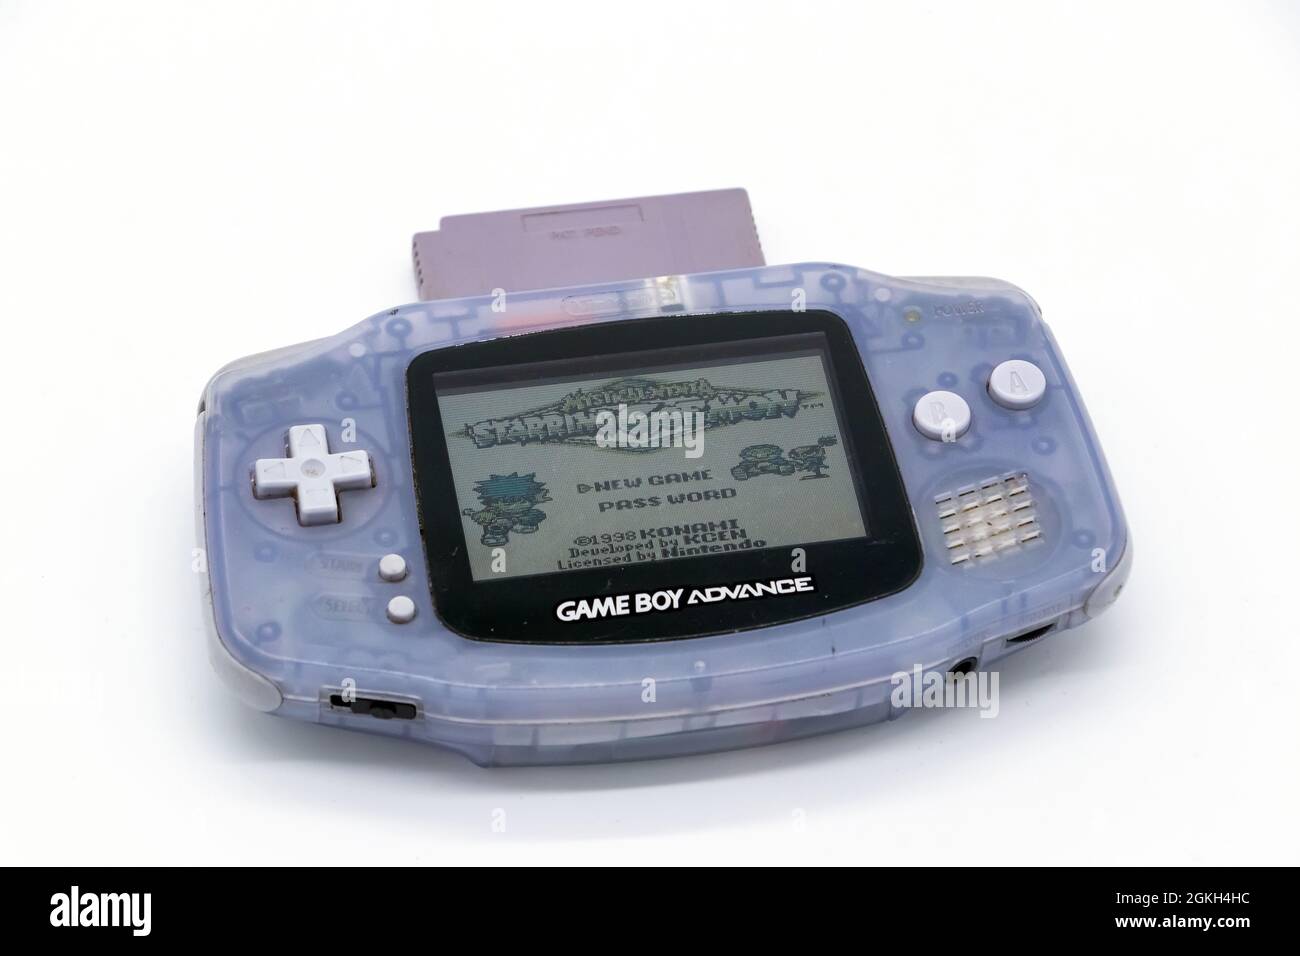 Game Boy Advance High Resolution Stock Photography and Images - Alamy